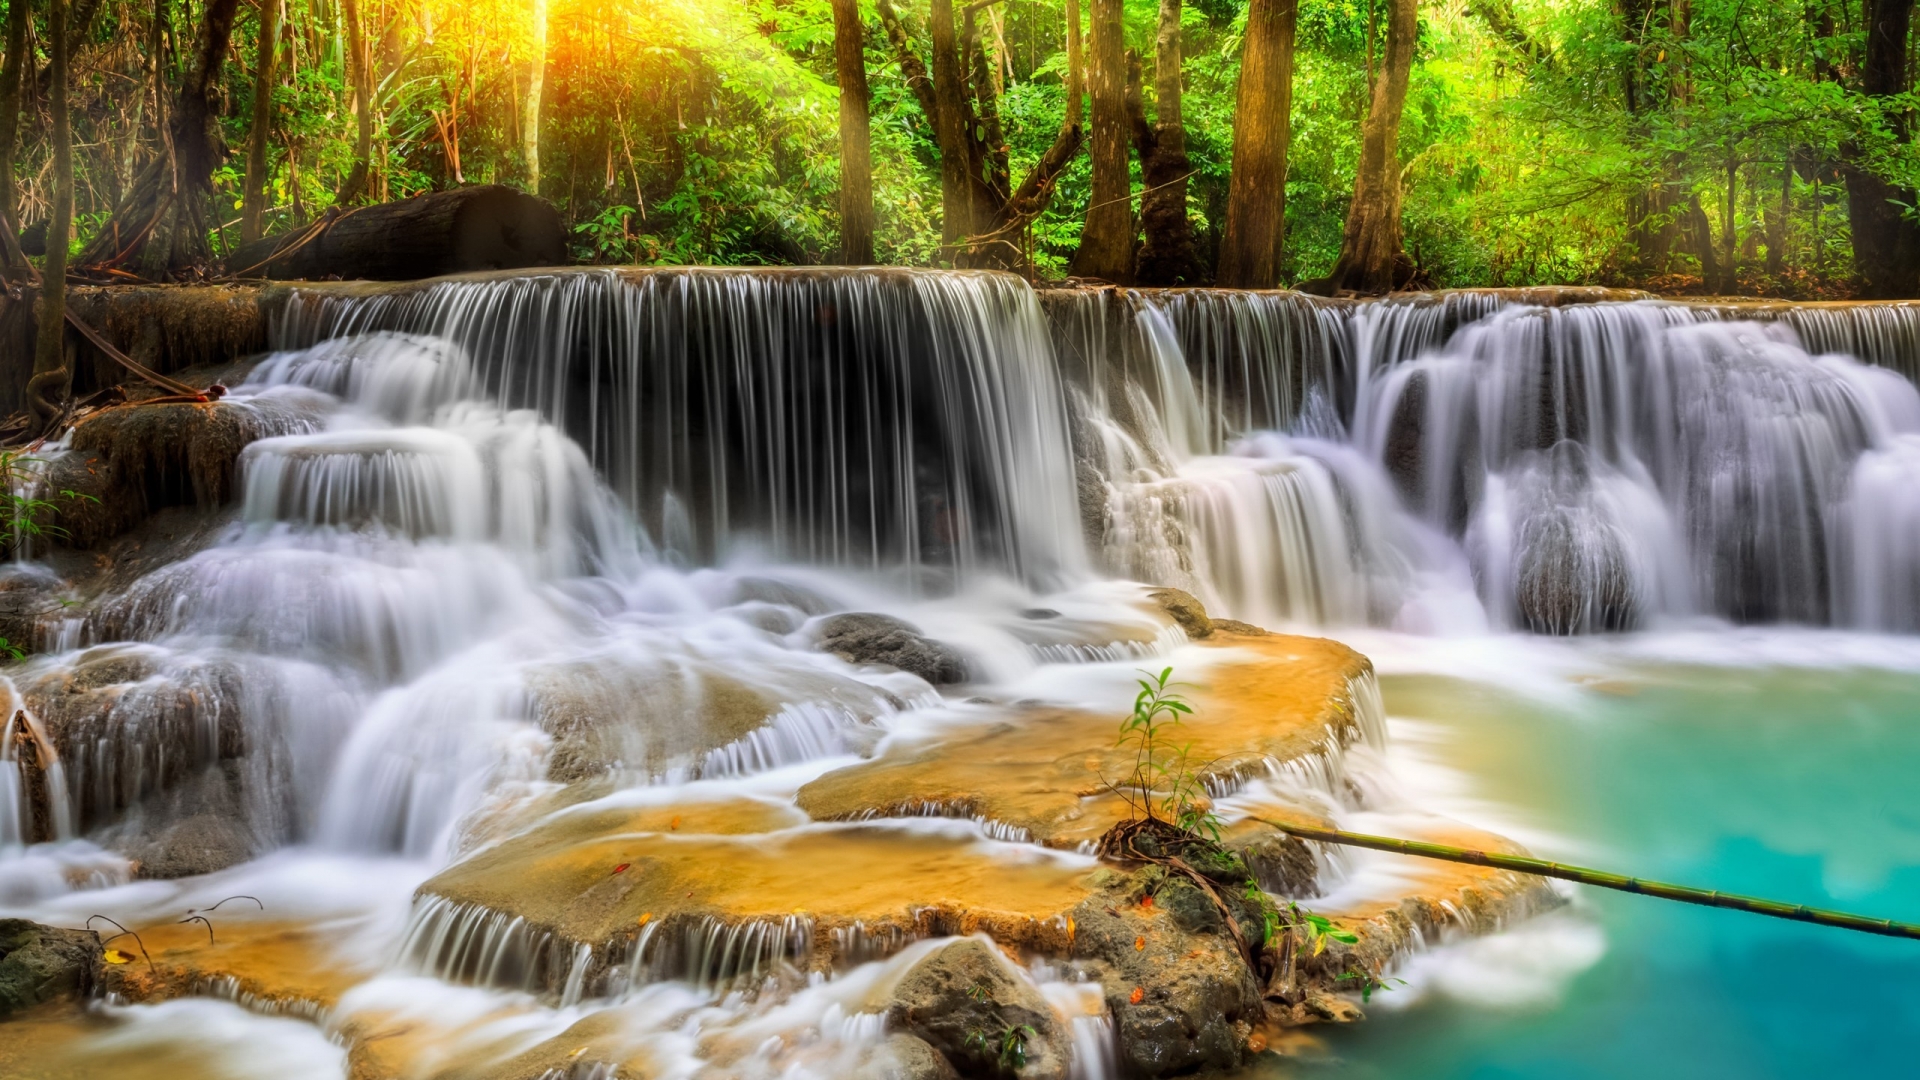 Waterfall in Thailand for 1920 x 1080 HDTV 1080p resolution